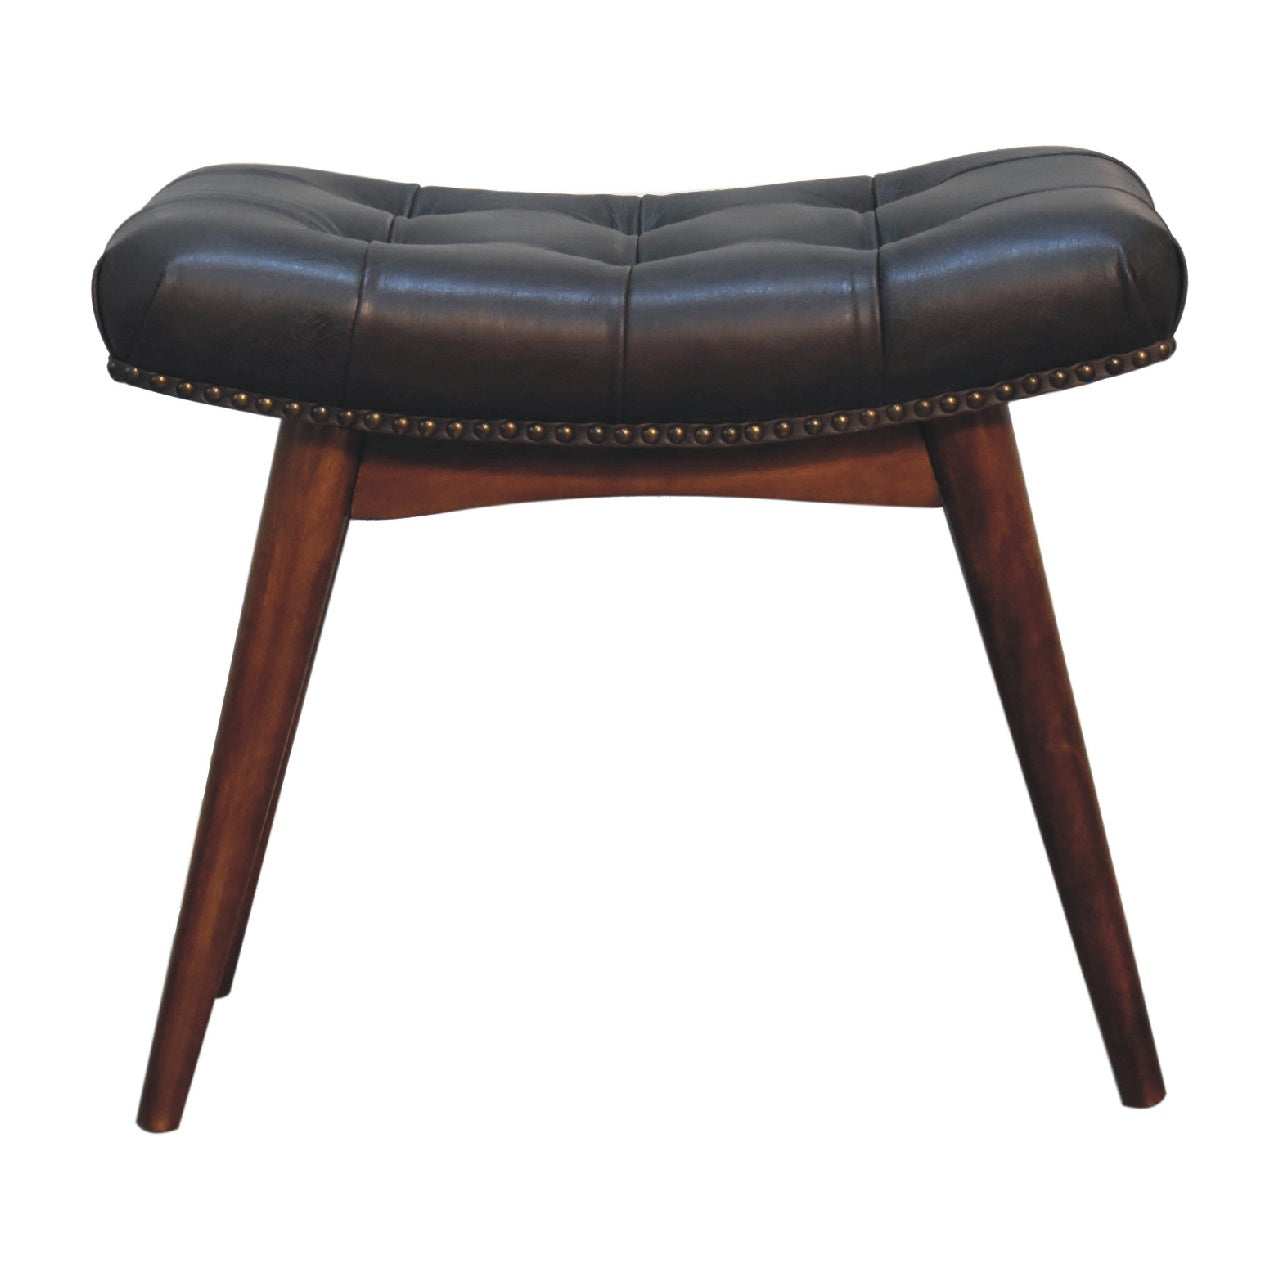 View Harbour Black Footstool information